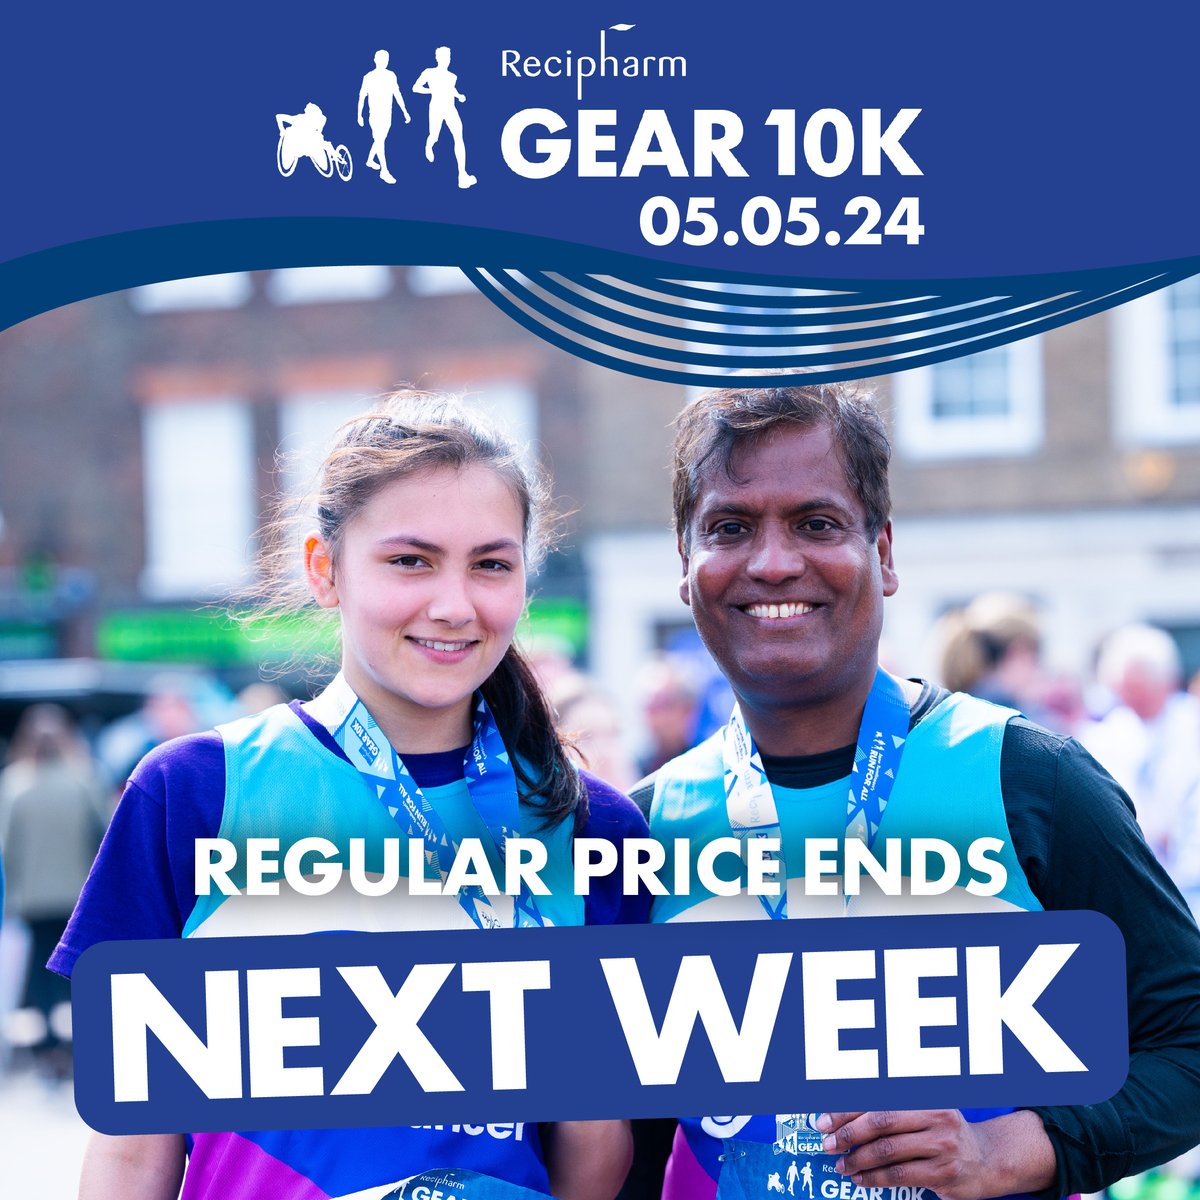 The regular price is ending soon. The price will increase on Sunday 24th March. Secure your discounted price before time runs out🙌 #runforall #gear10k